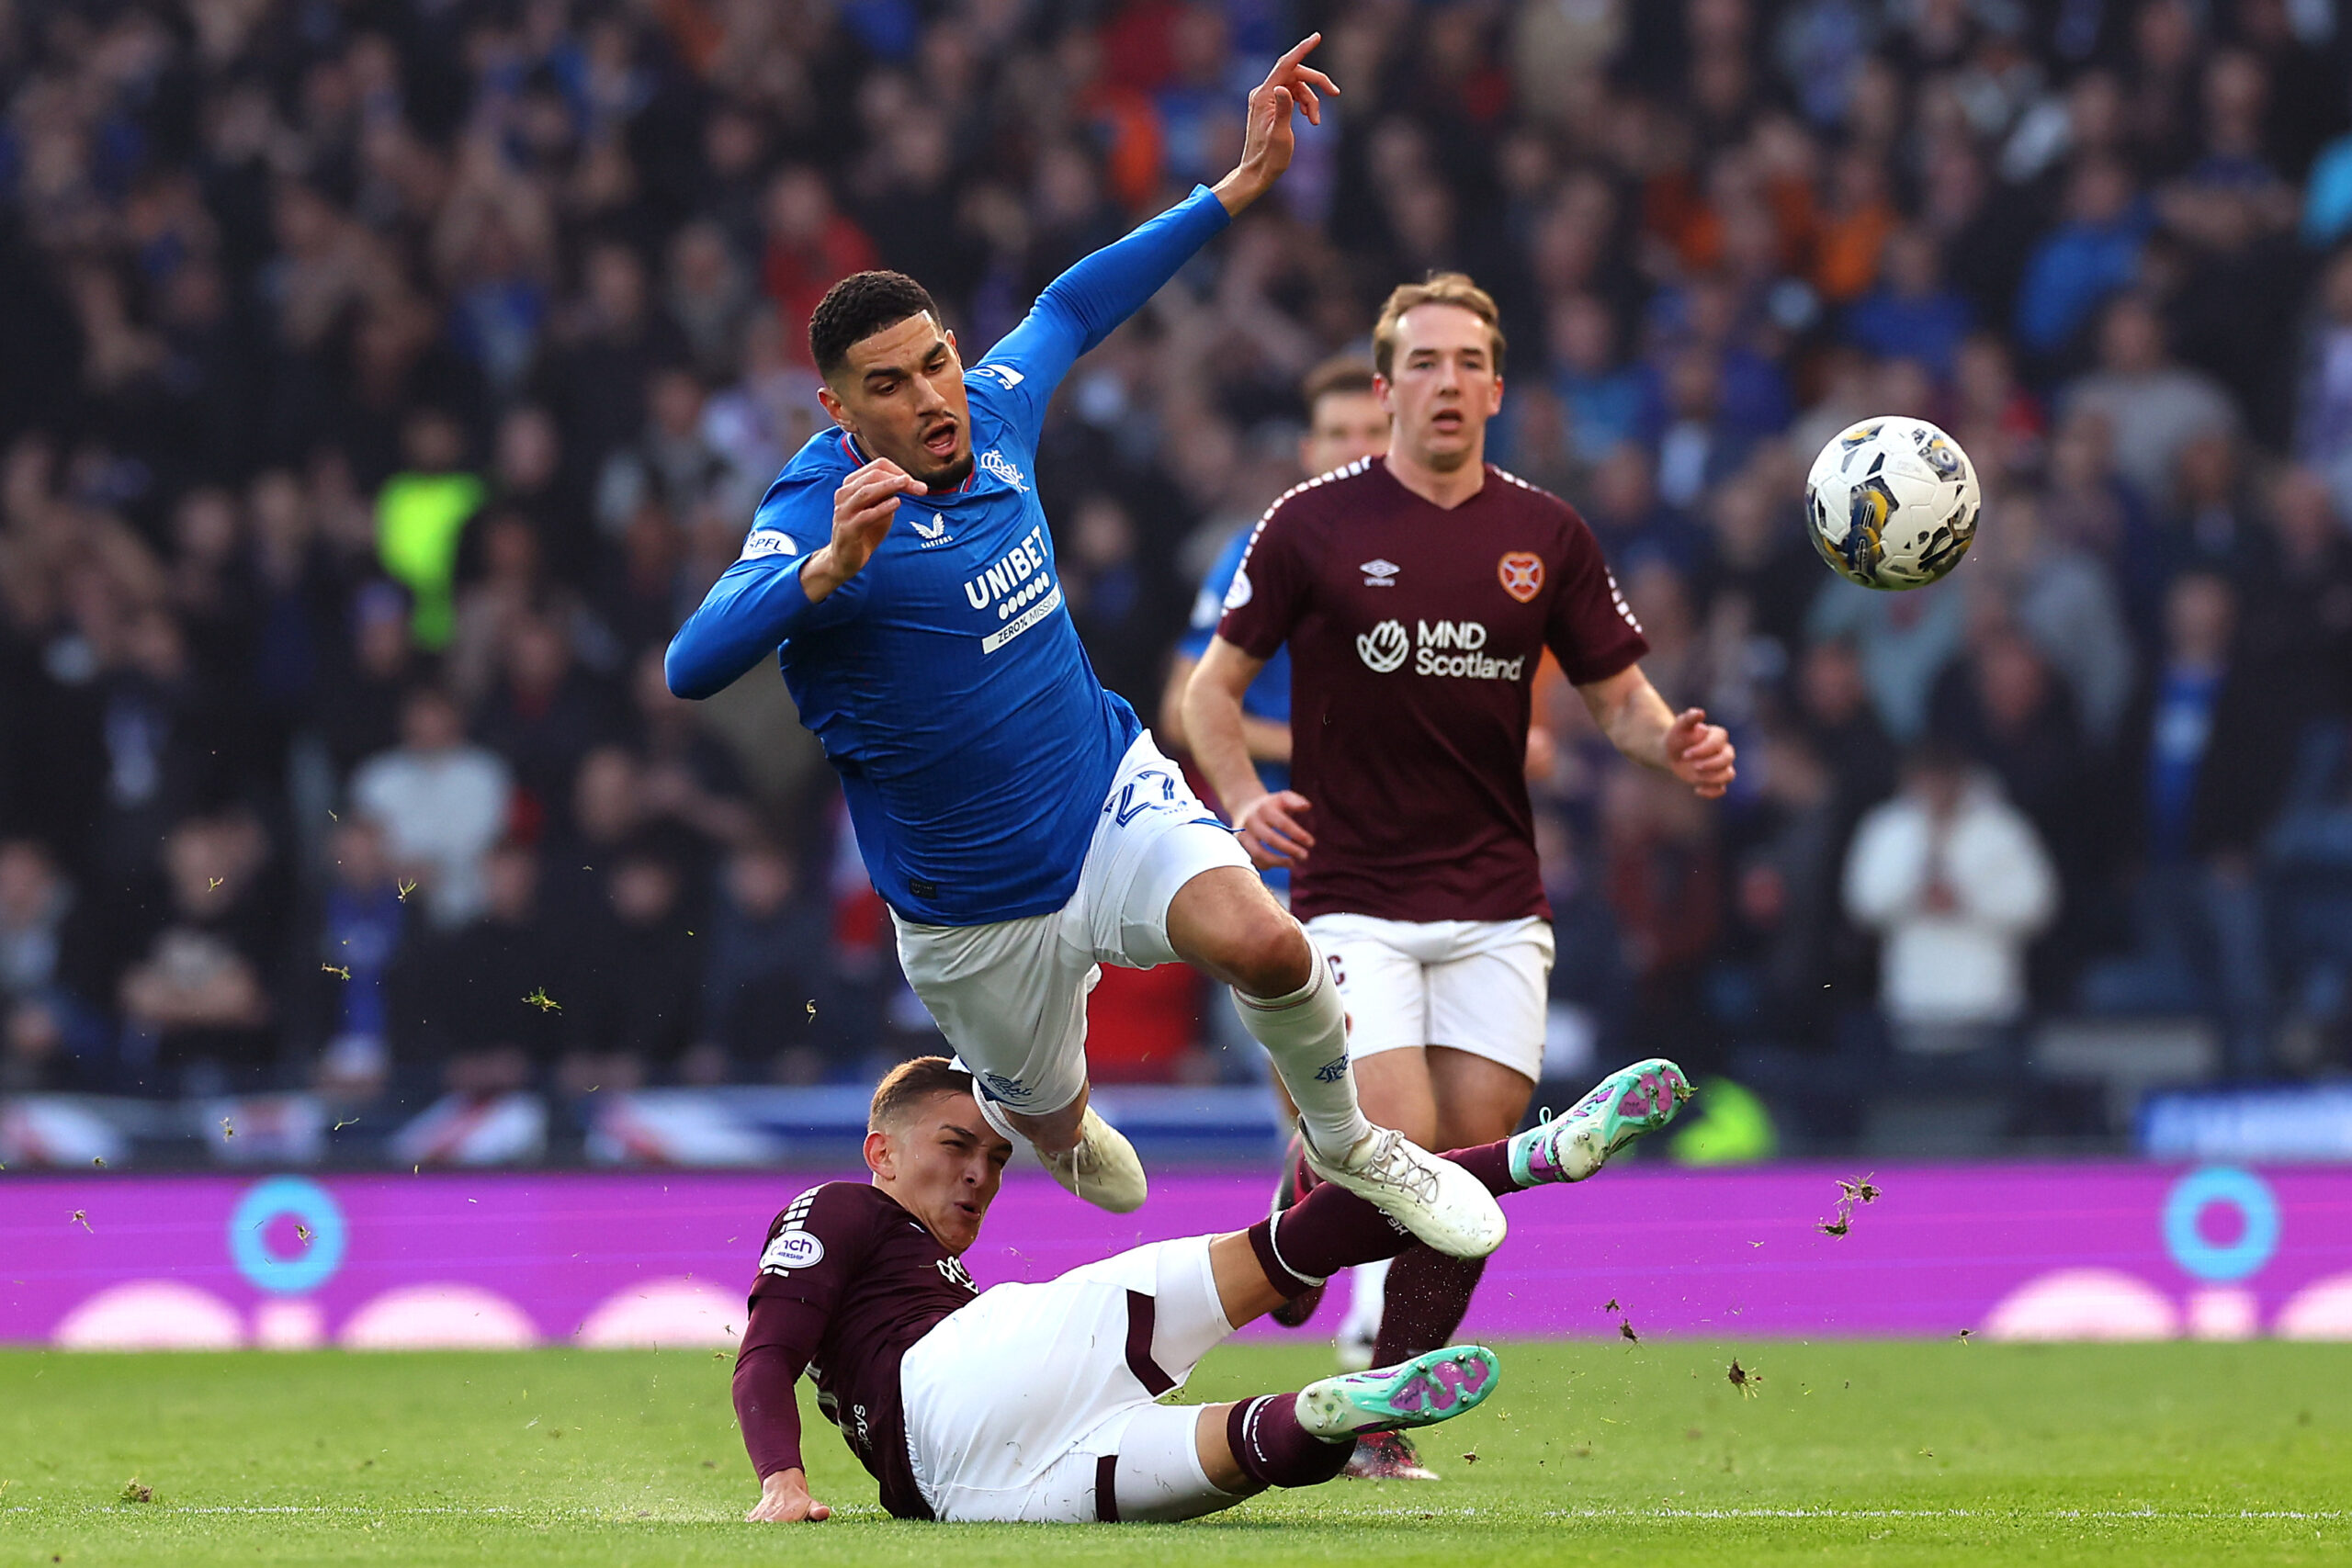 Rangers have 6 players out of contract this summer… Ibrox Noise